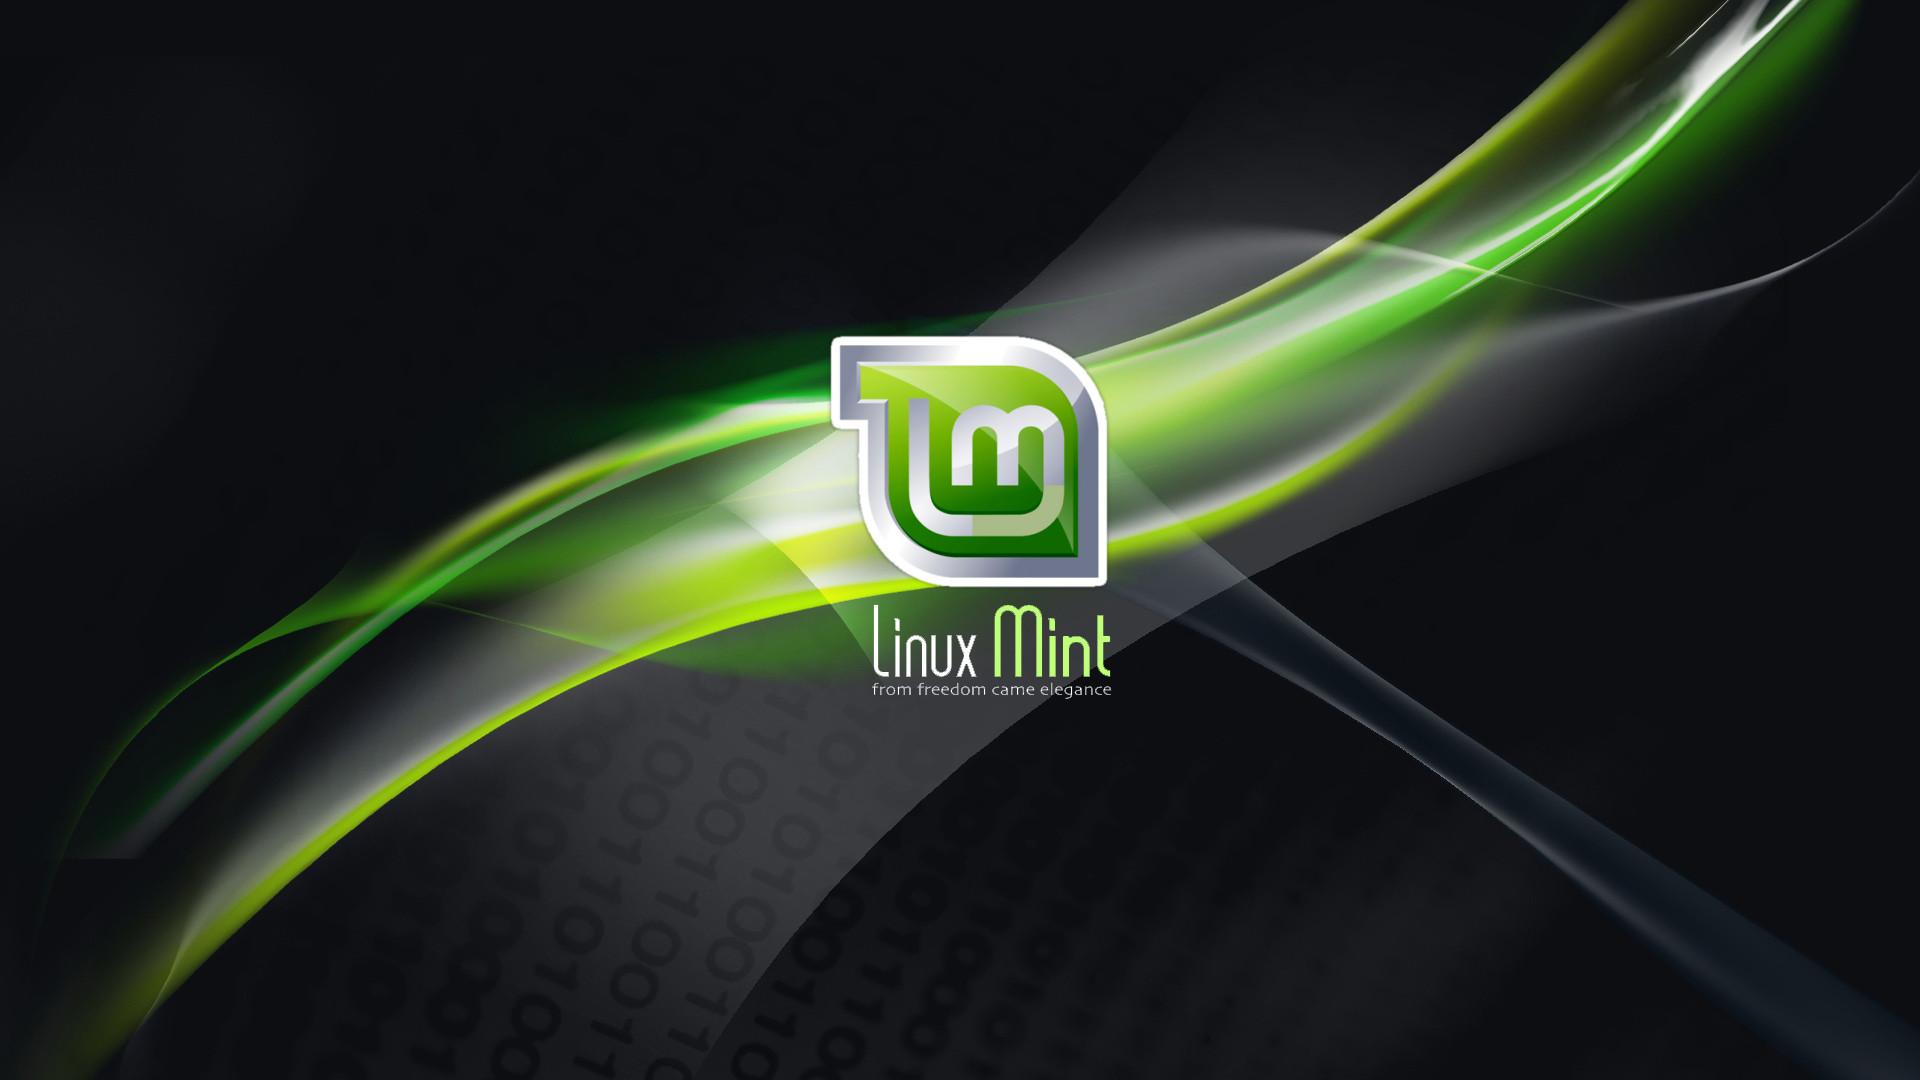 1920x1080 Linux Mint Wallpapers - Wallpaper Cave | Epic Car Wallpapers | Pinterest | Mint  wallpaper and Wallpaper